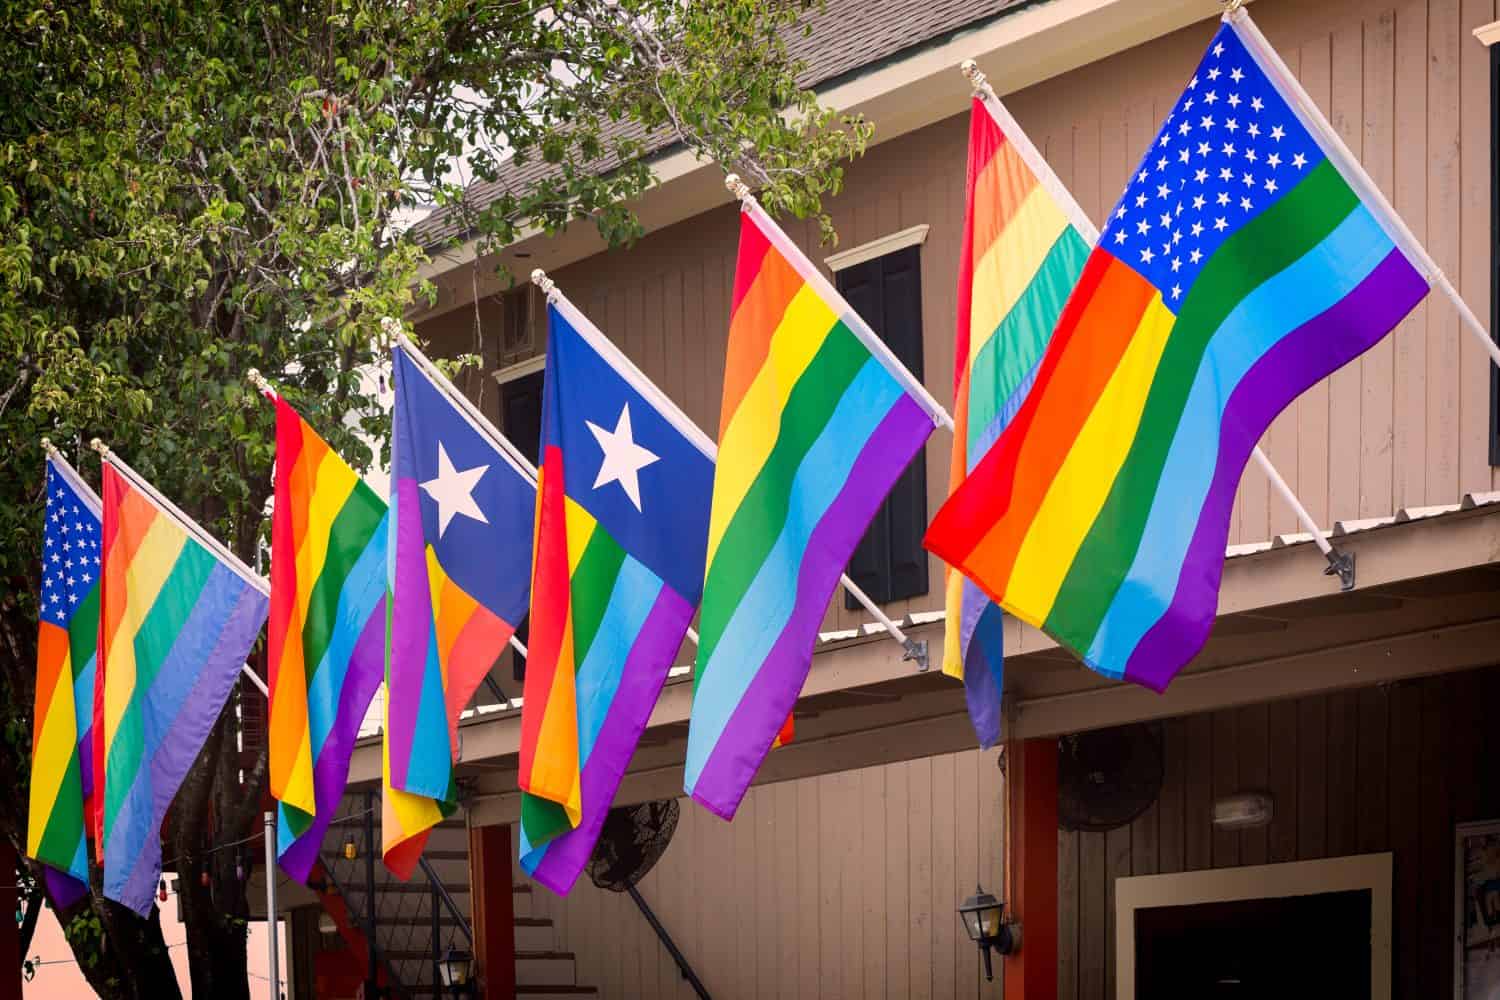 The rainbow flags, symbol of gay pride are displayed in the city of Houston, Texas